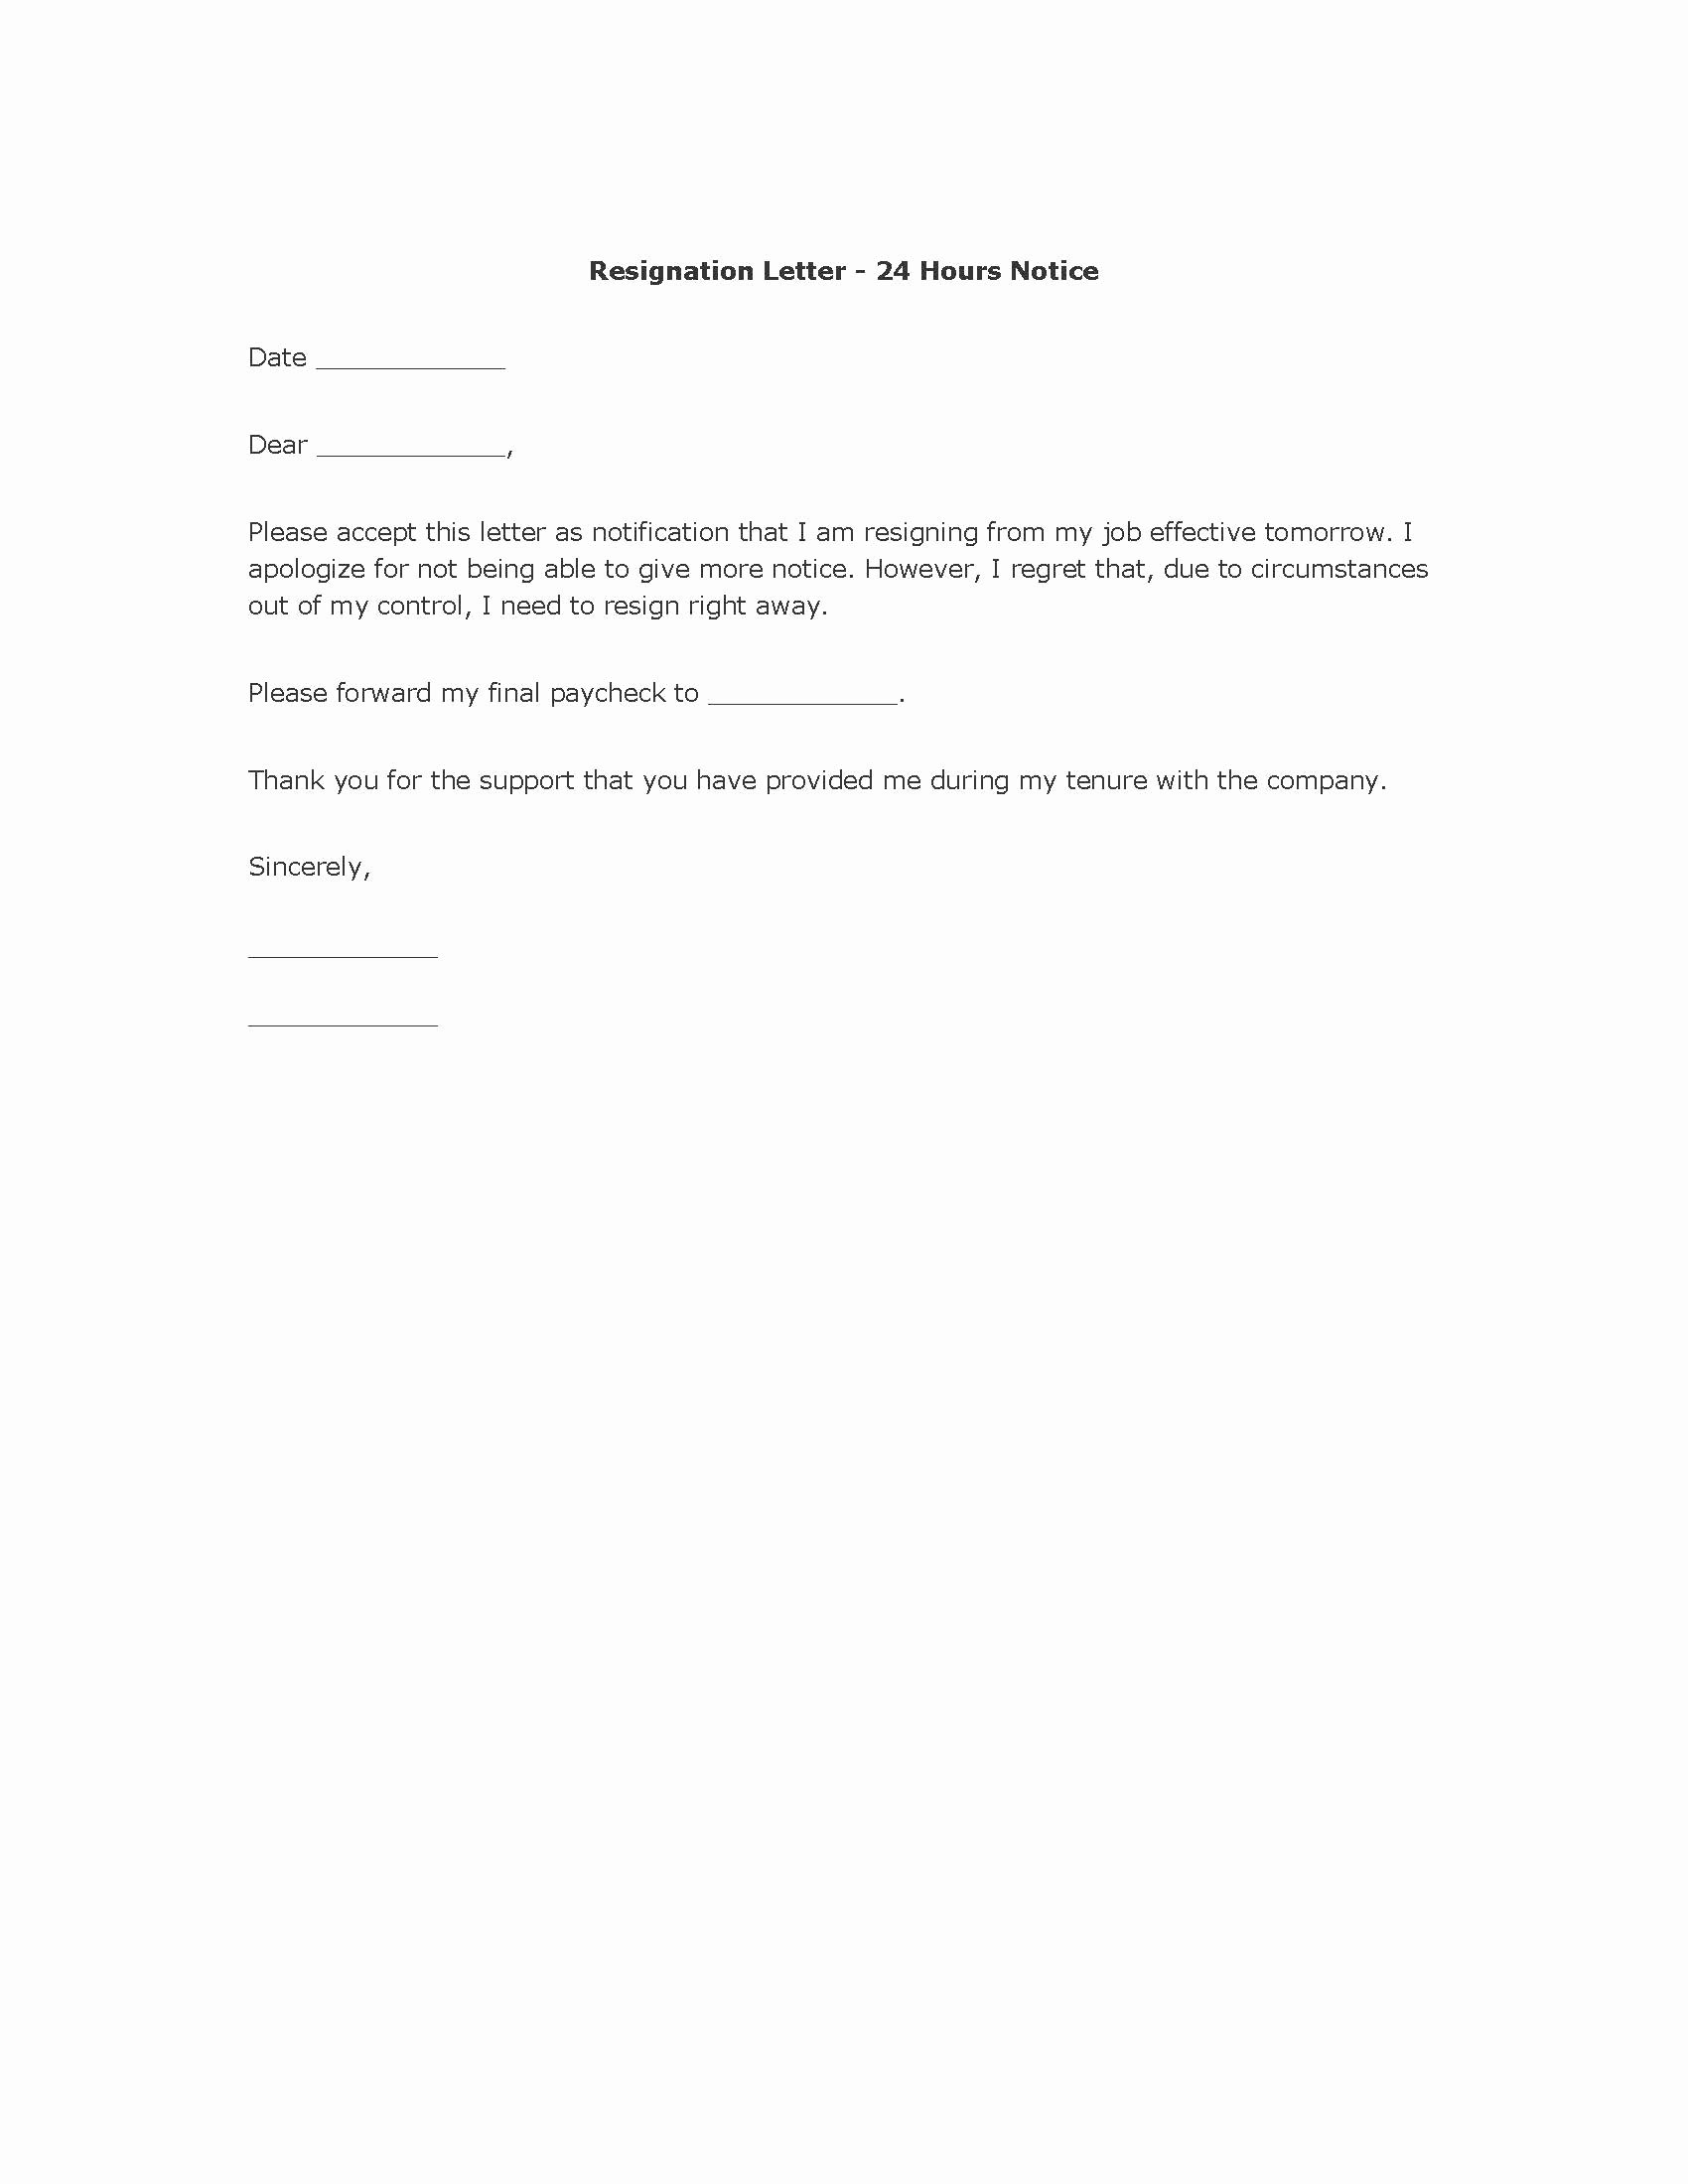 Free Resignation Letter Template 24 Hour Notice